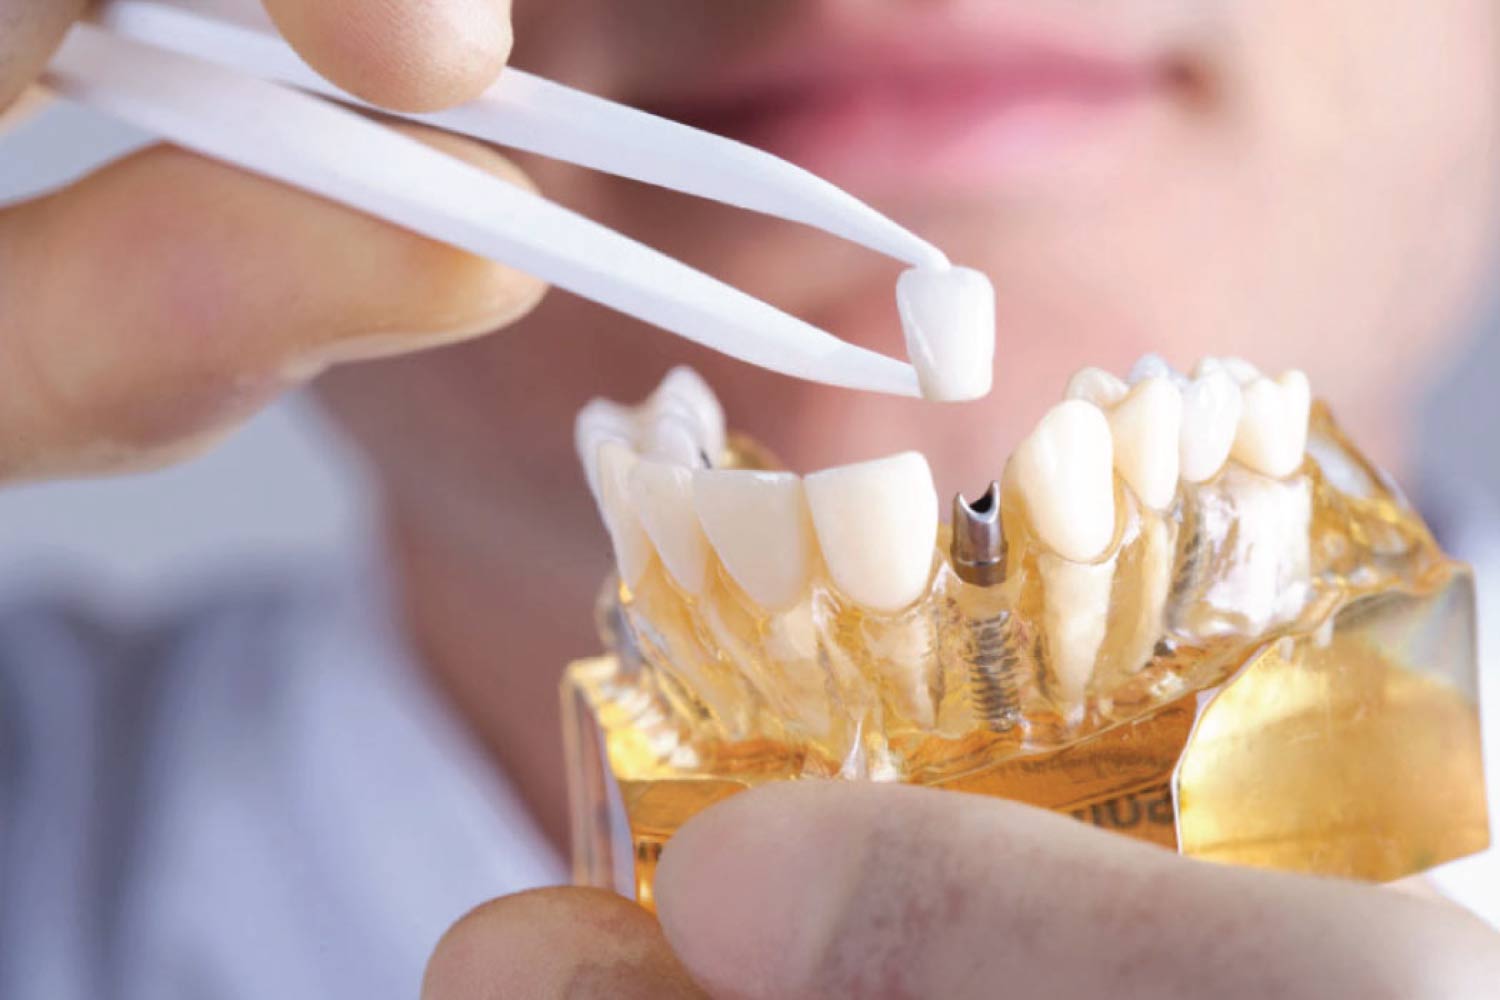 dental implant model being manipulated by a dentist